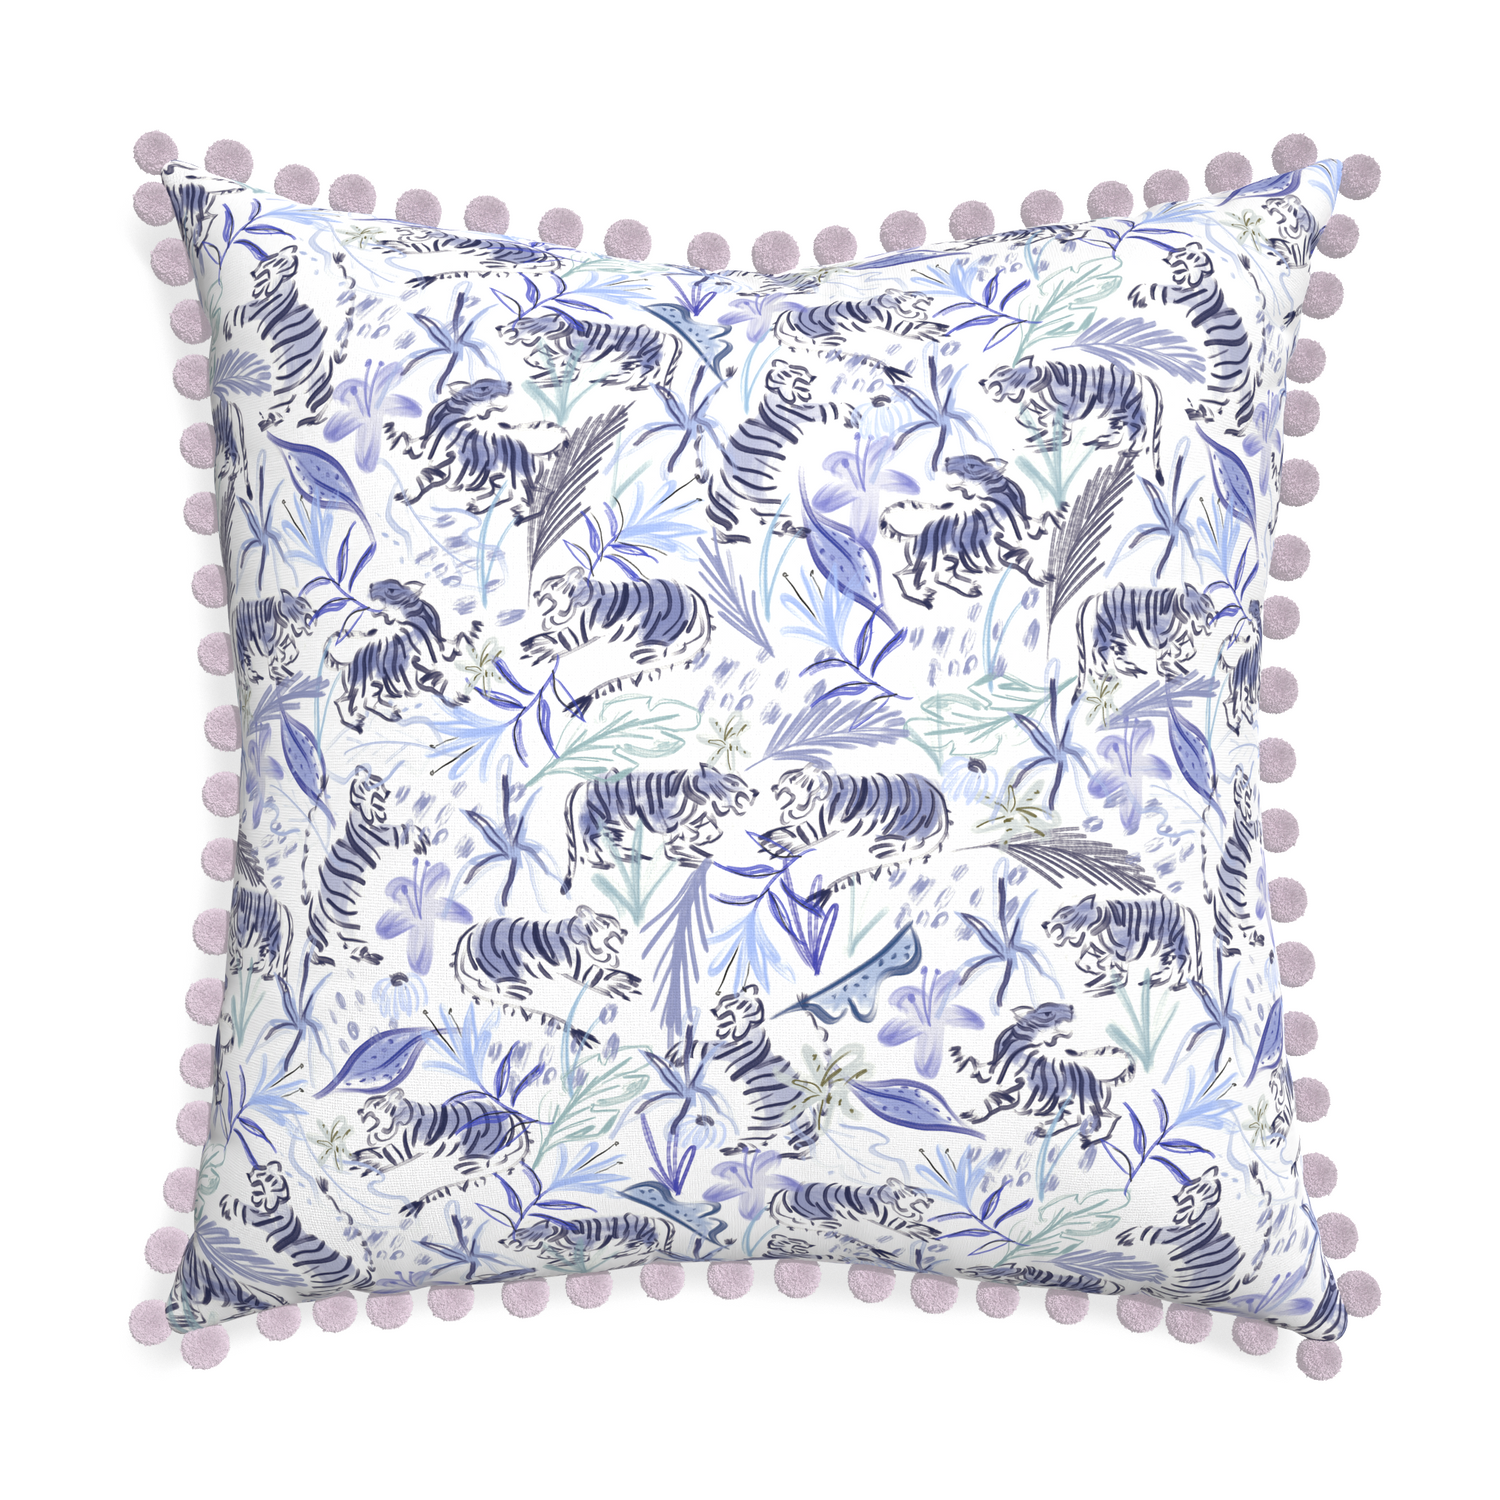 Euro-sham frida blue custom blue with intricate tiger designpillow with l on white background